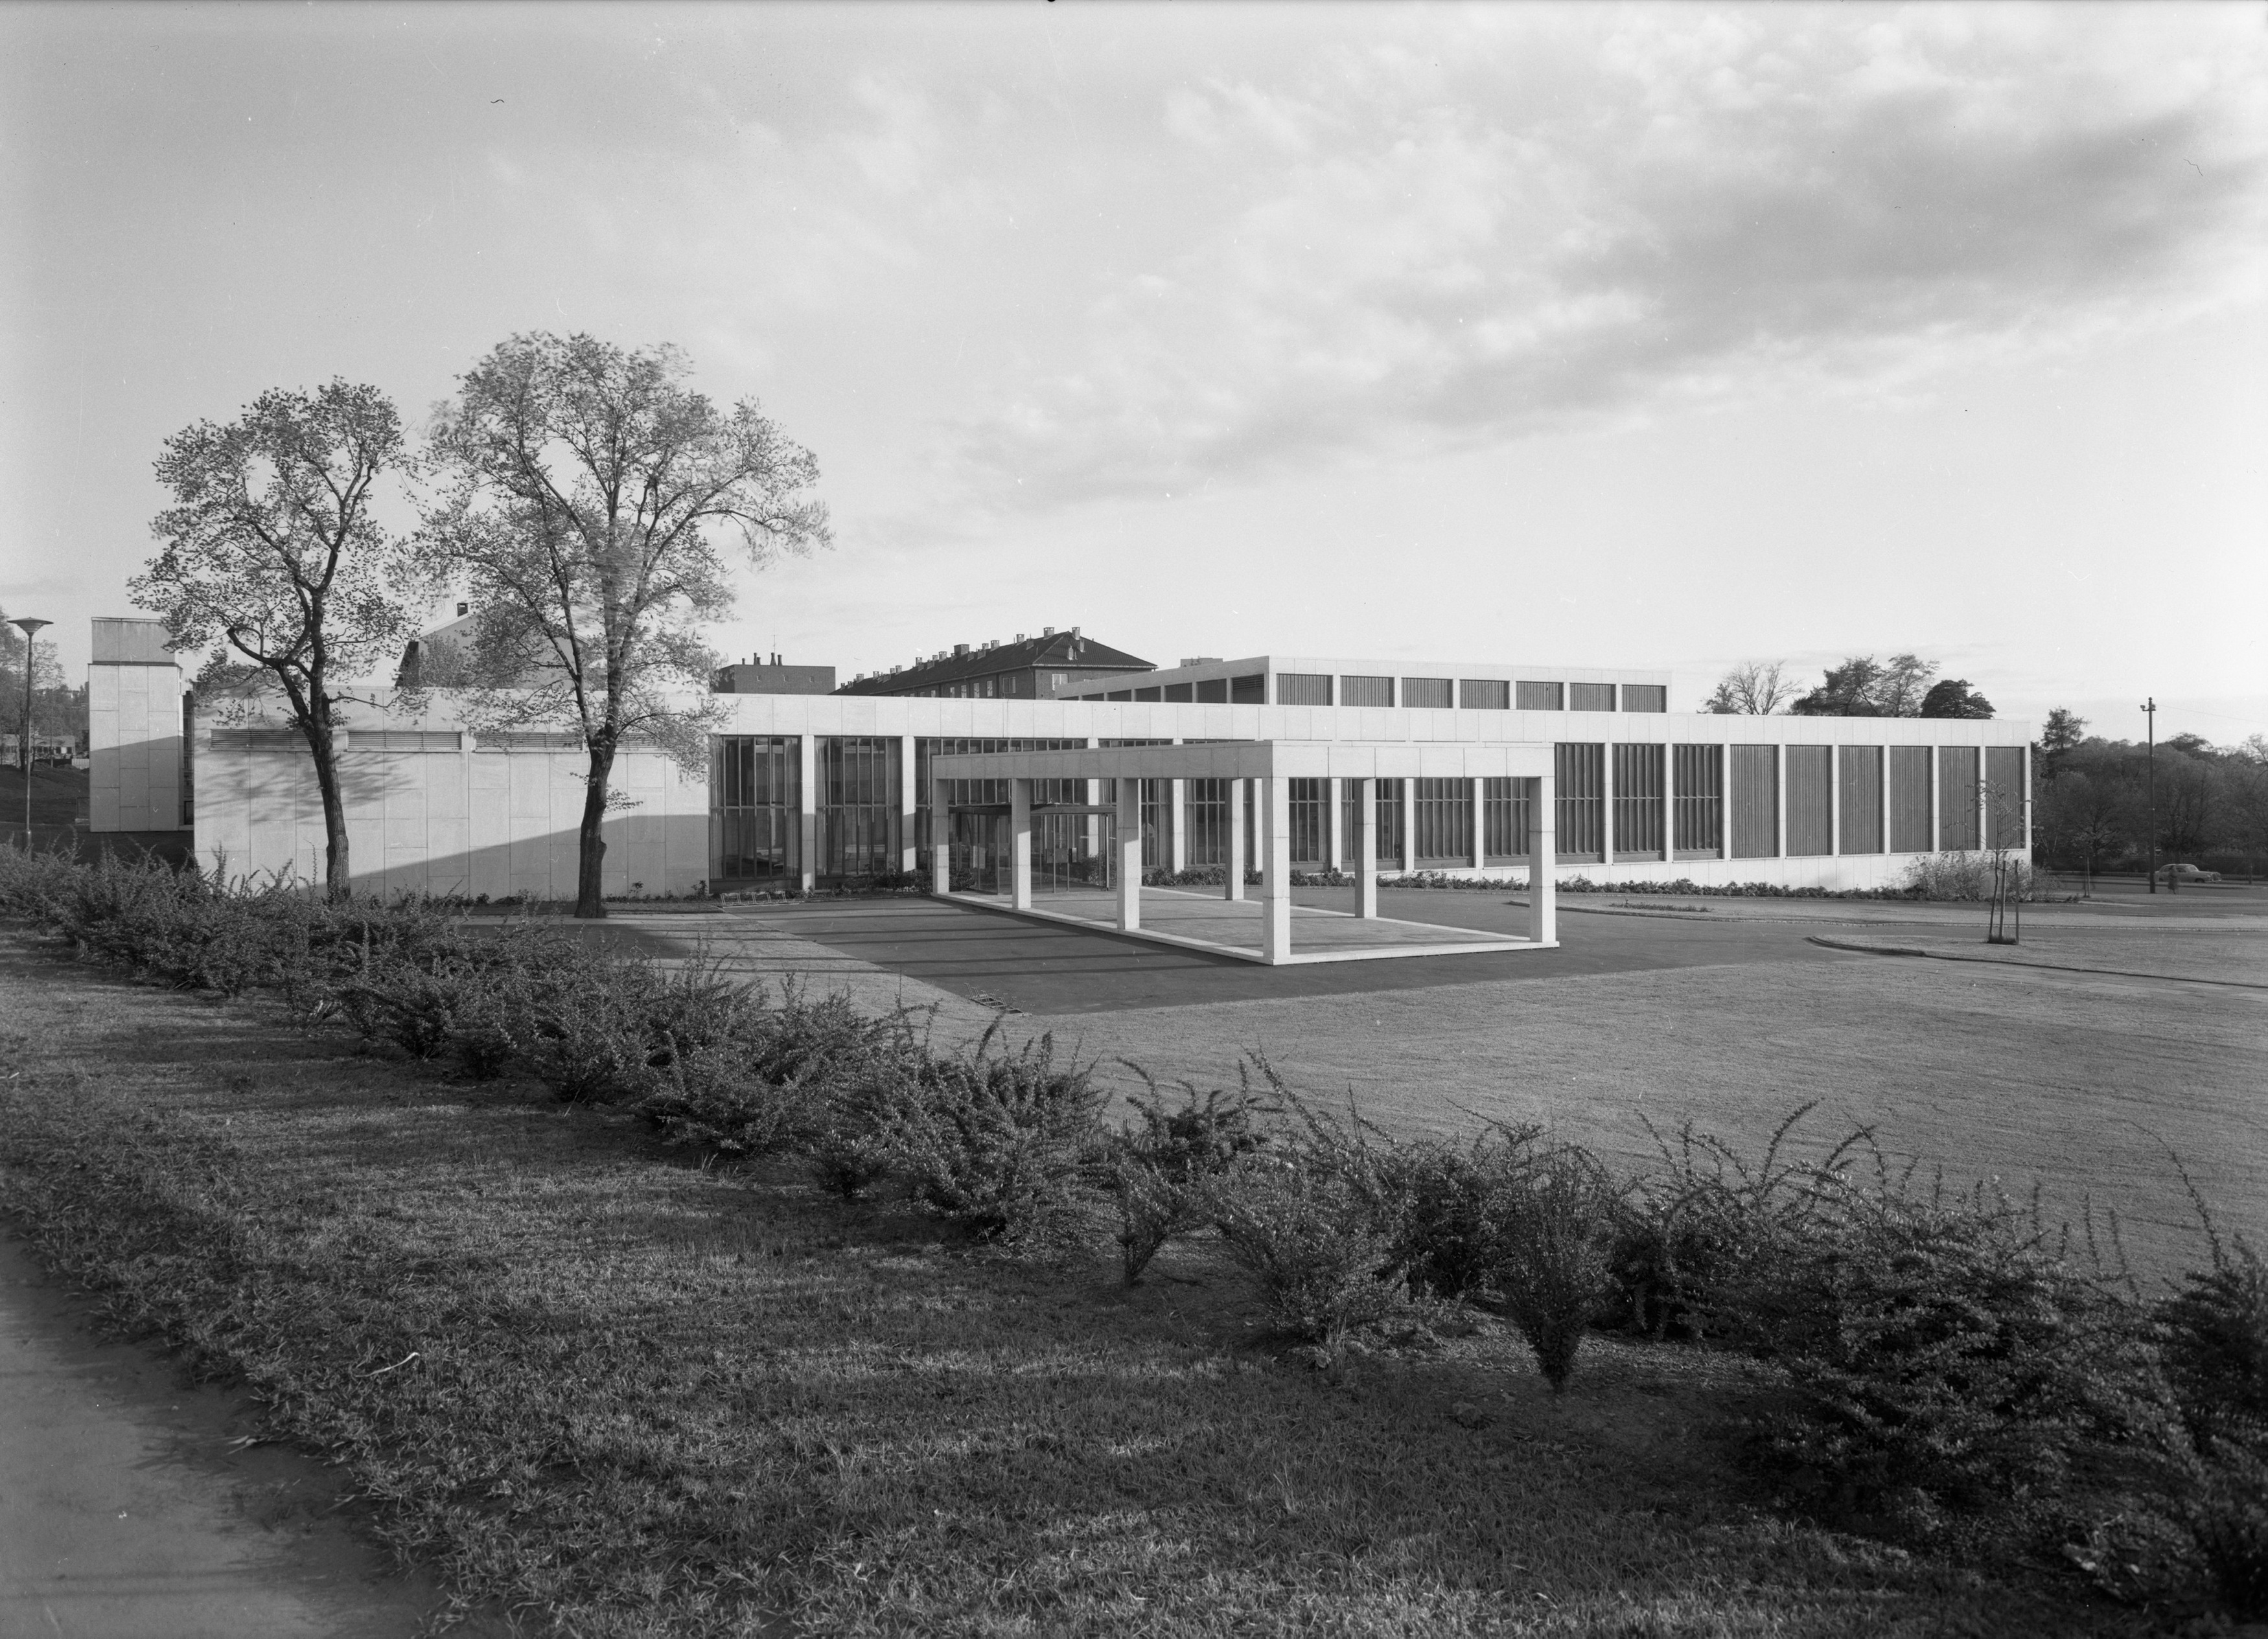 The Museum at Tøyen at its opening in 1962. Photo @ Teigens fotoatelier/Dextra photo, Norsk Teknisk Museum